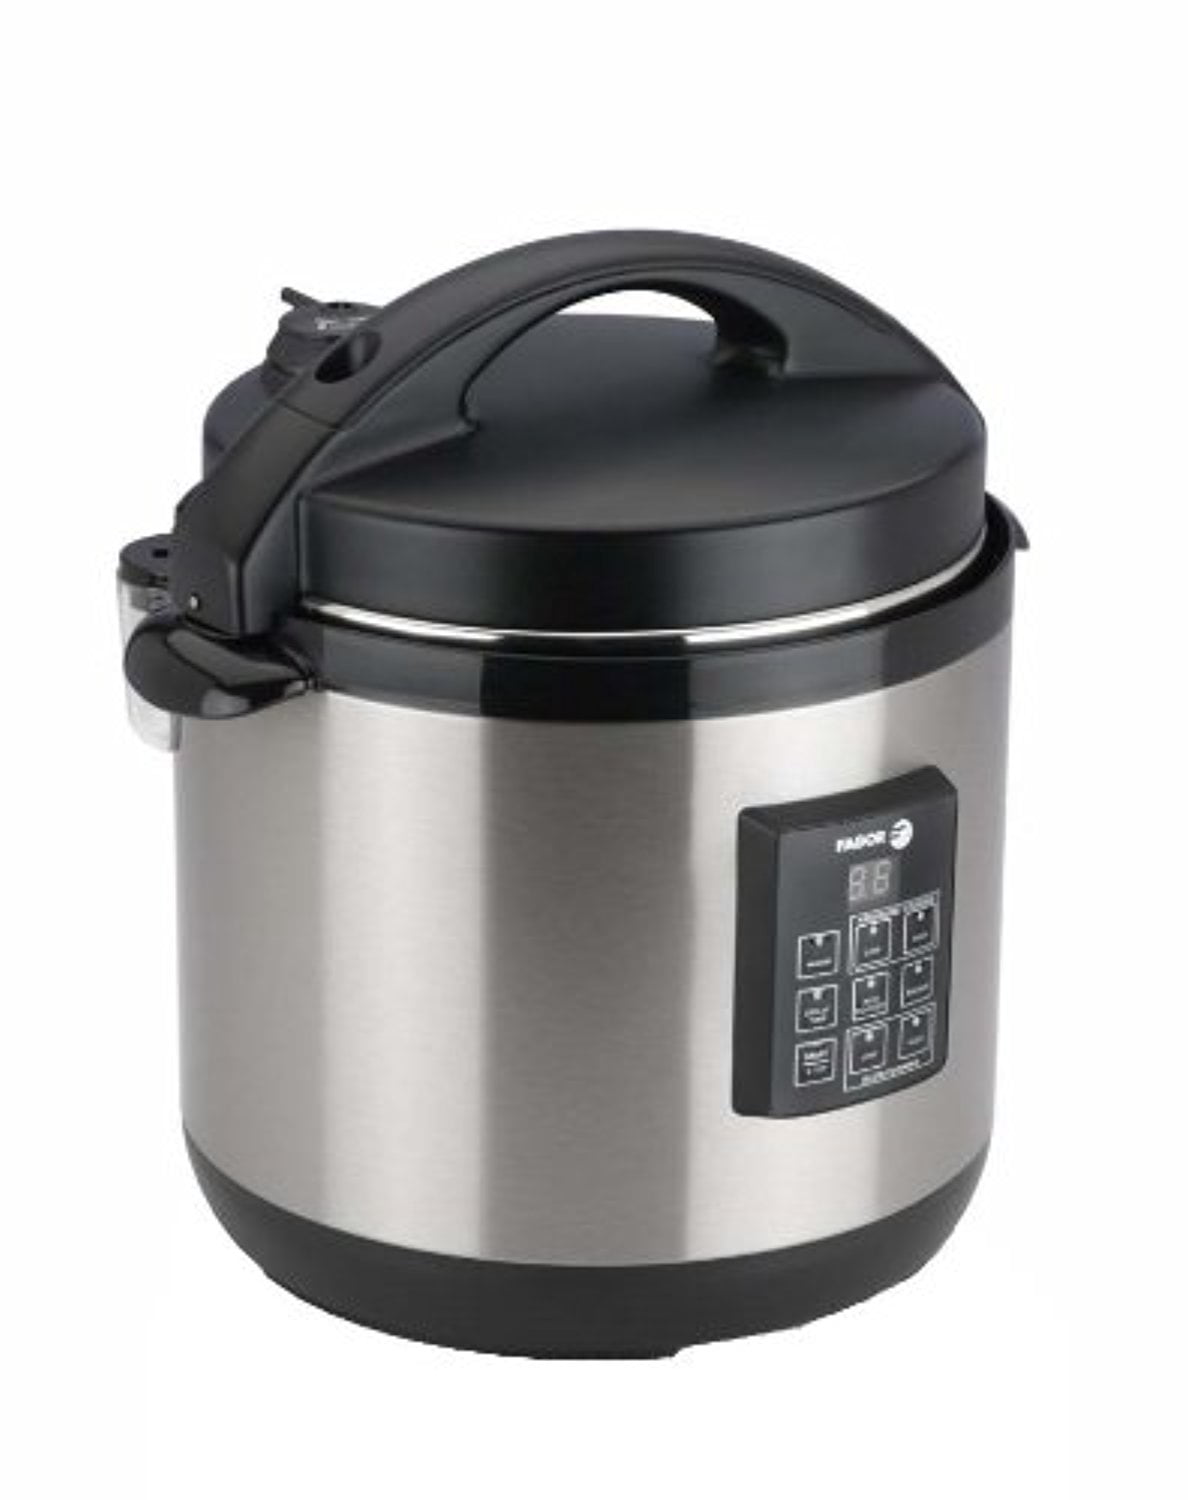 Fagor LUX Multi Cooker Stainless Steel - Wisemen Trading and Supply